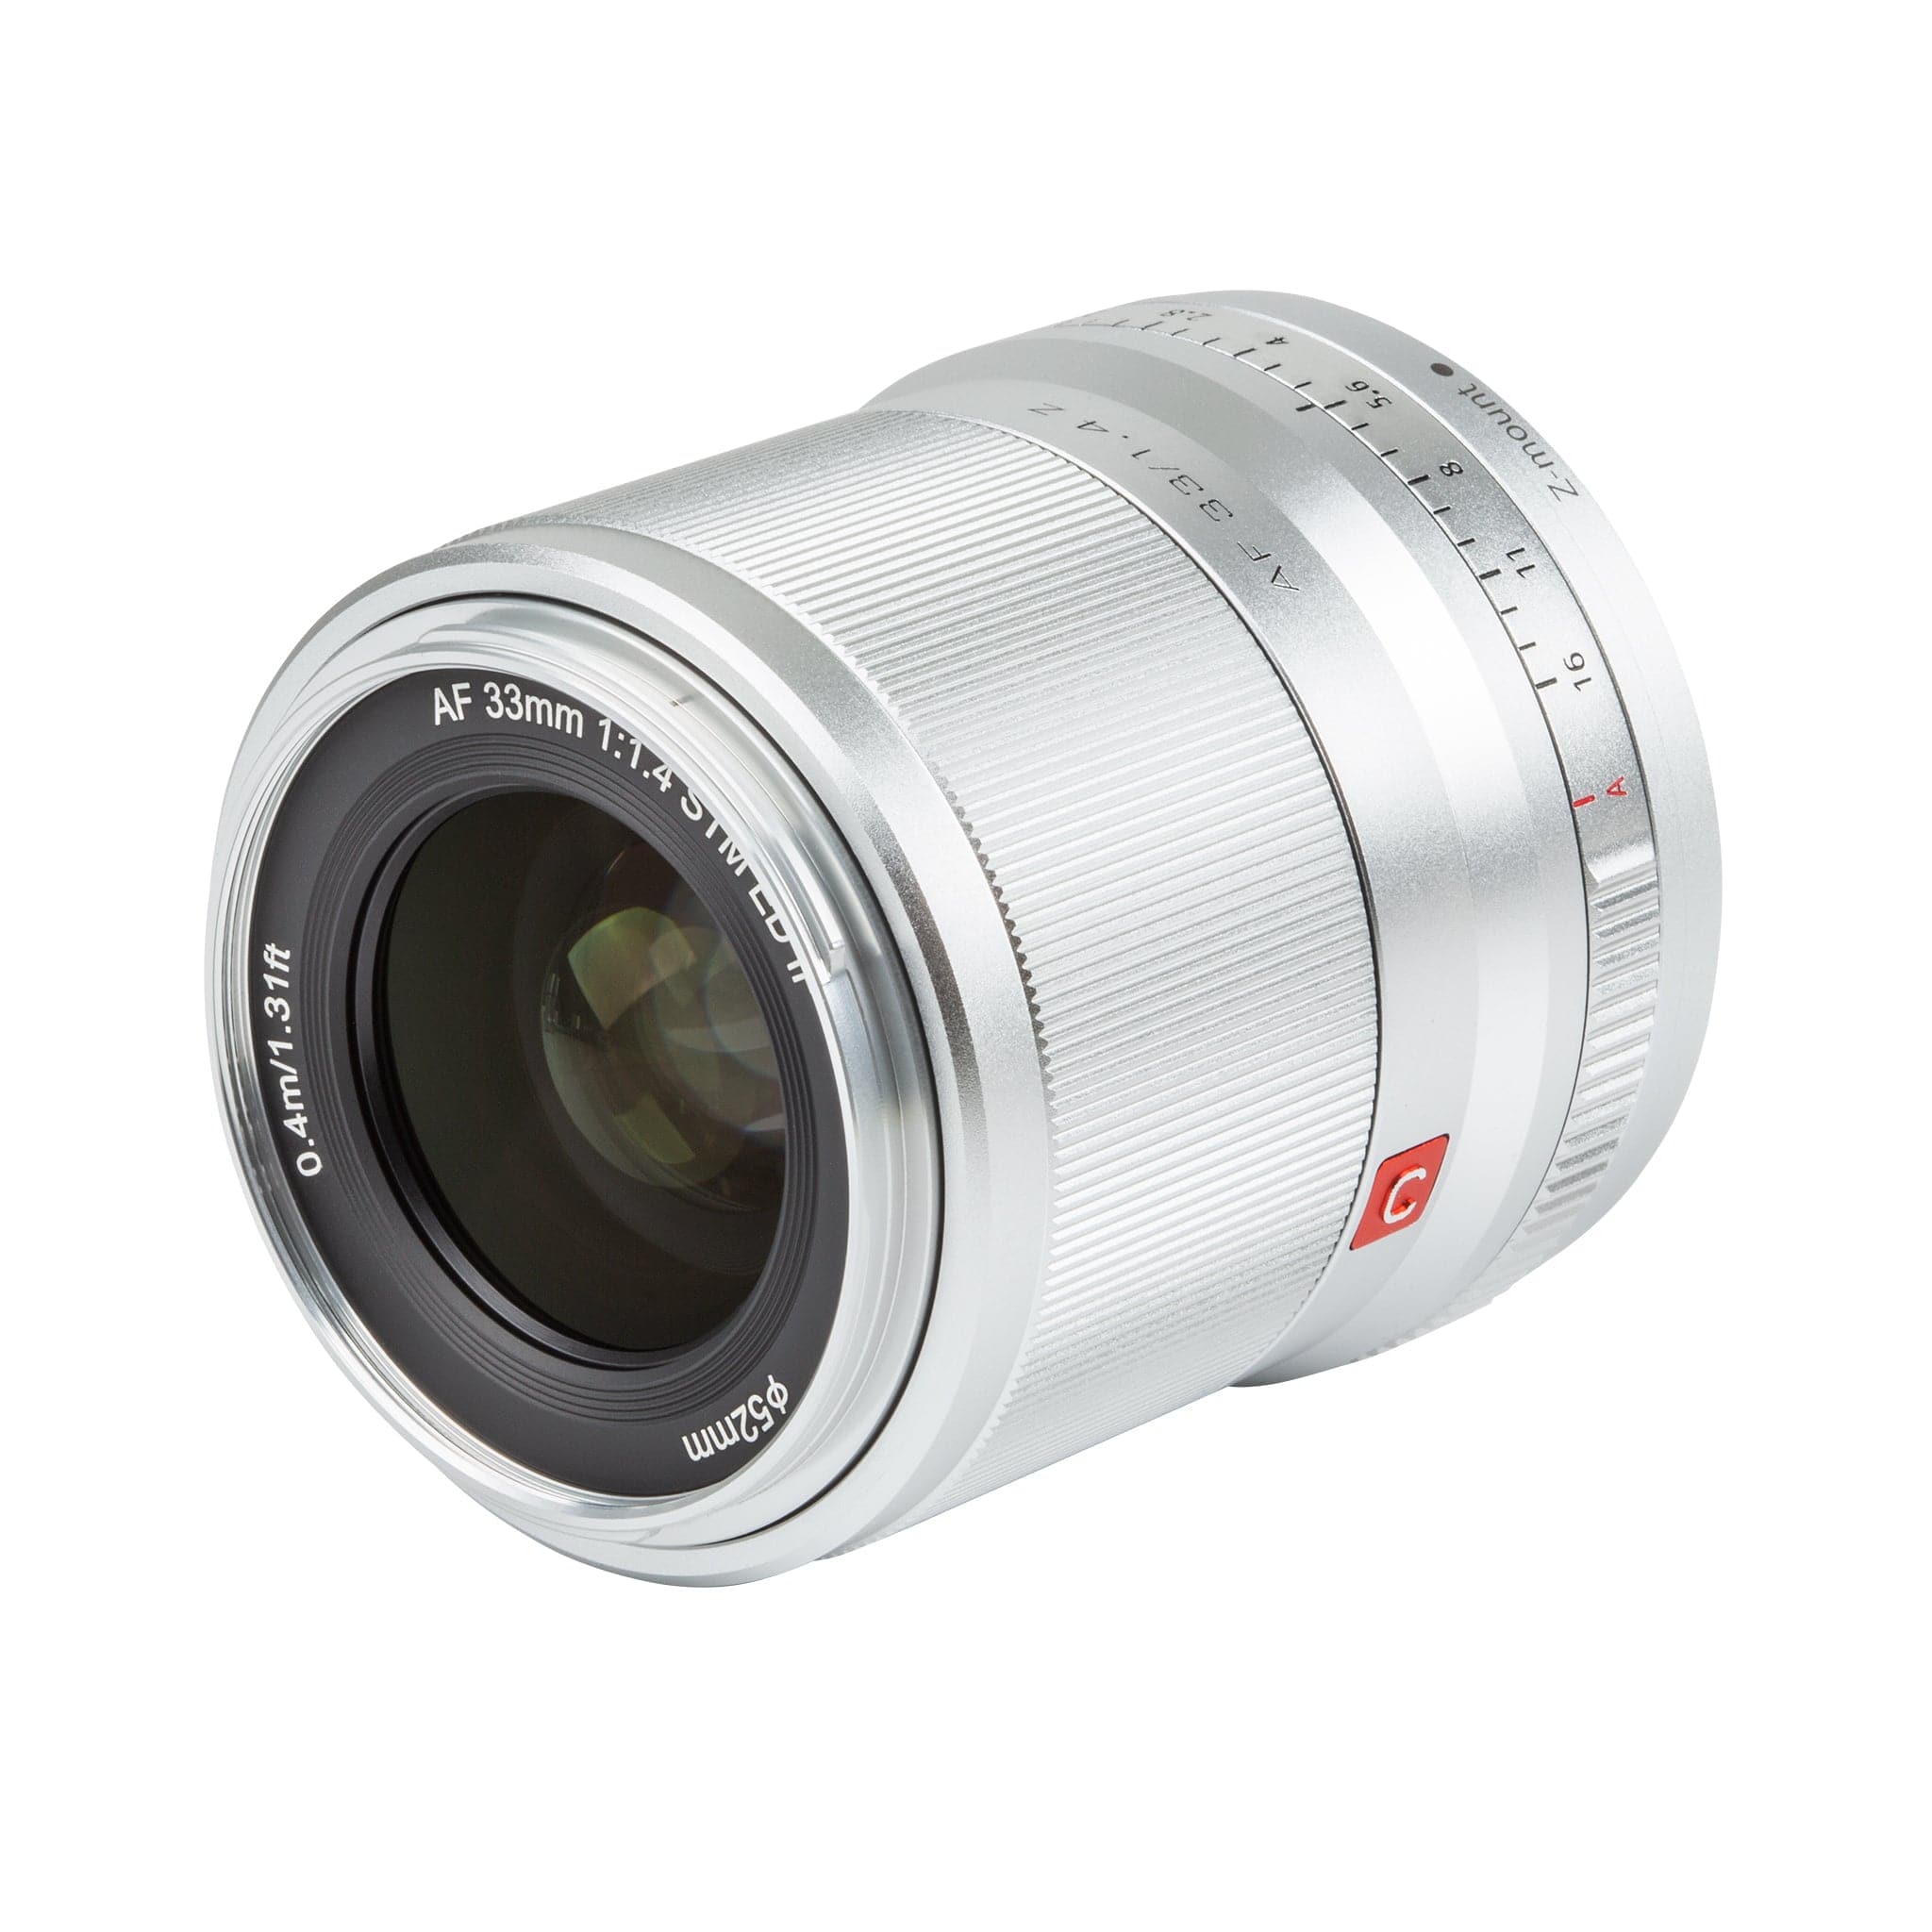 Viltrox Mirrorless Z-mount Silver Version 23mm/33mm/56mm F1.4 Auto Focus APS-C Prime Lens with STM Motor Support Eye-AF Suitable for the Nikon Zfc Model